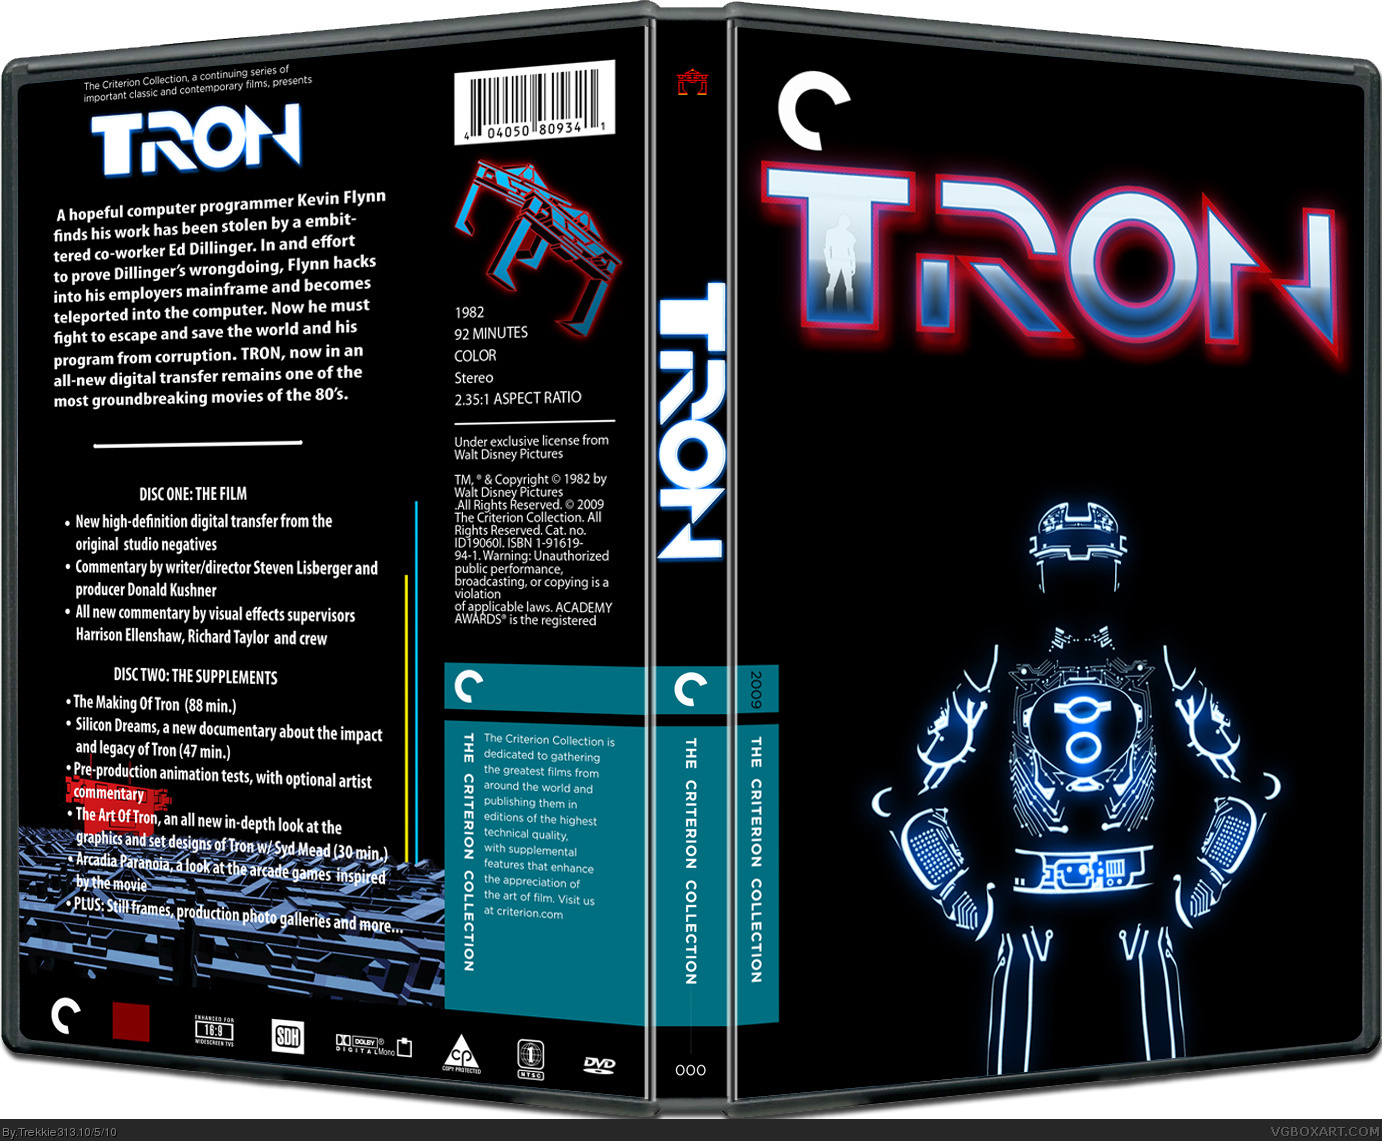 TRON: Criterion Collection box cover